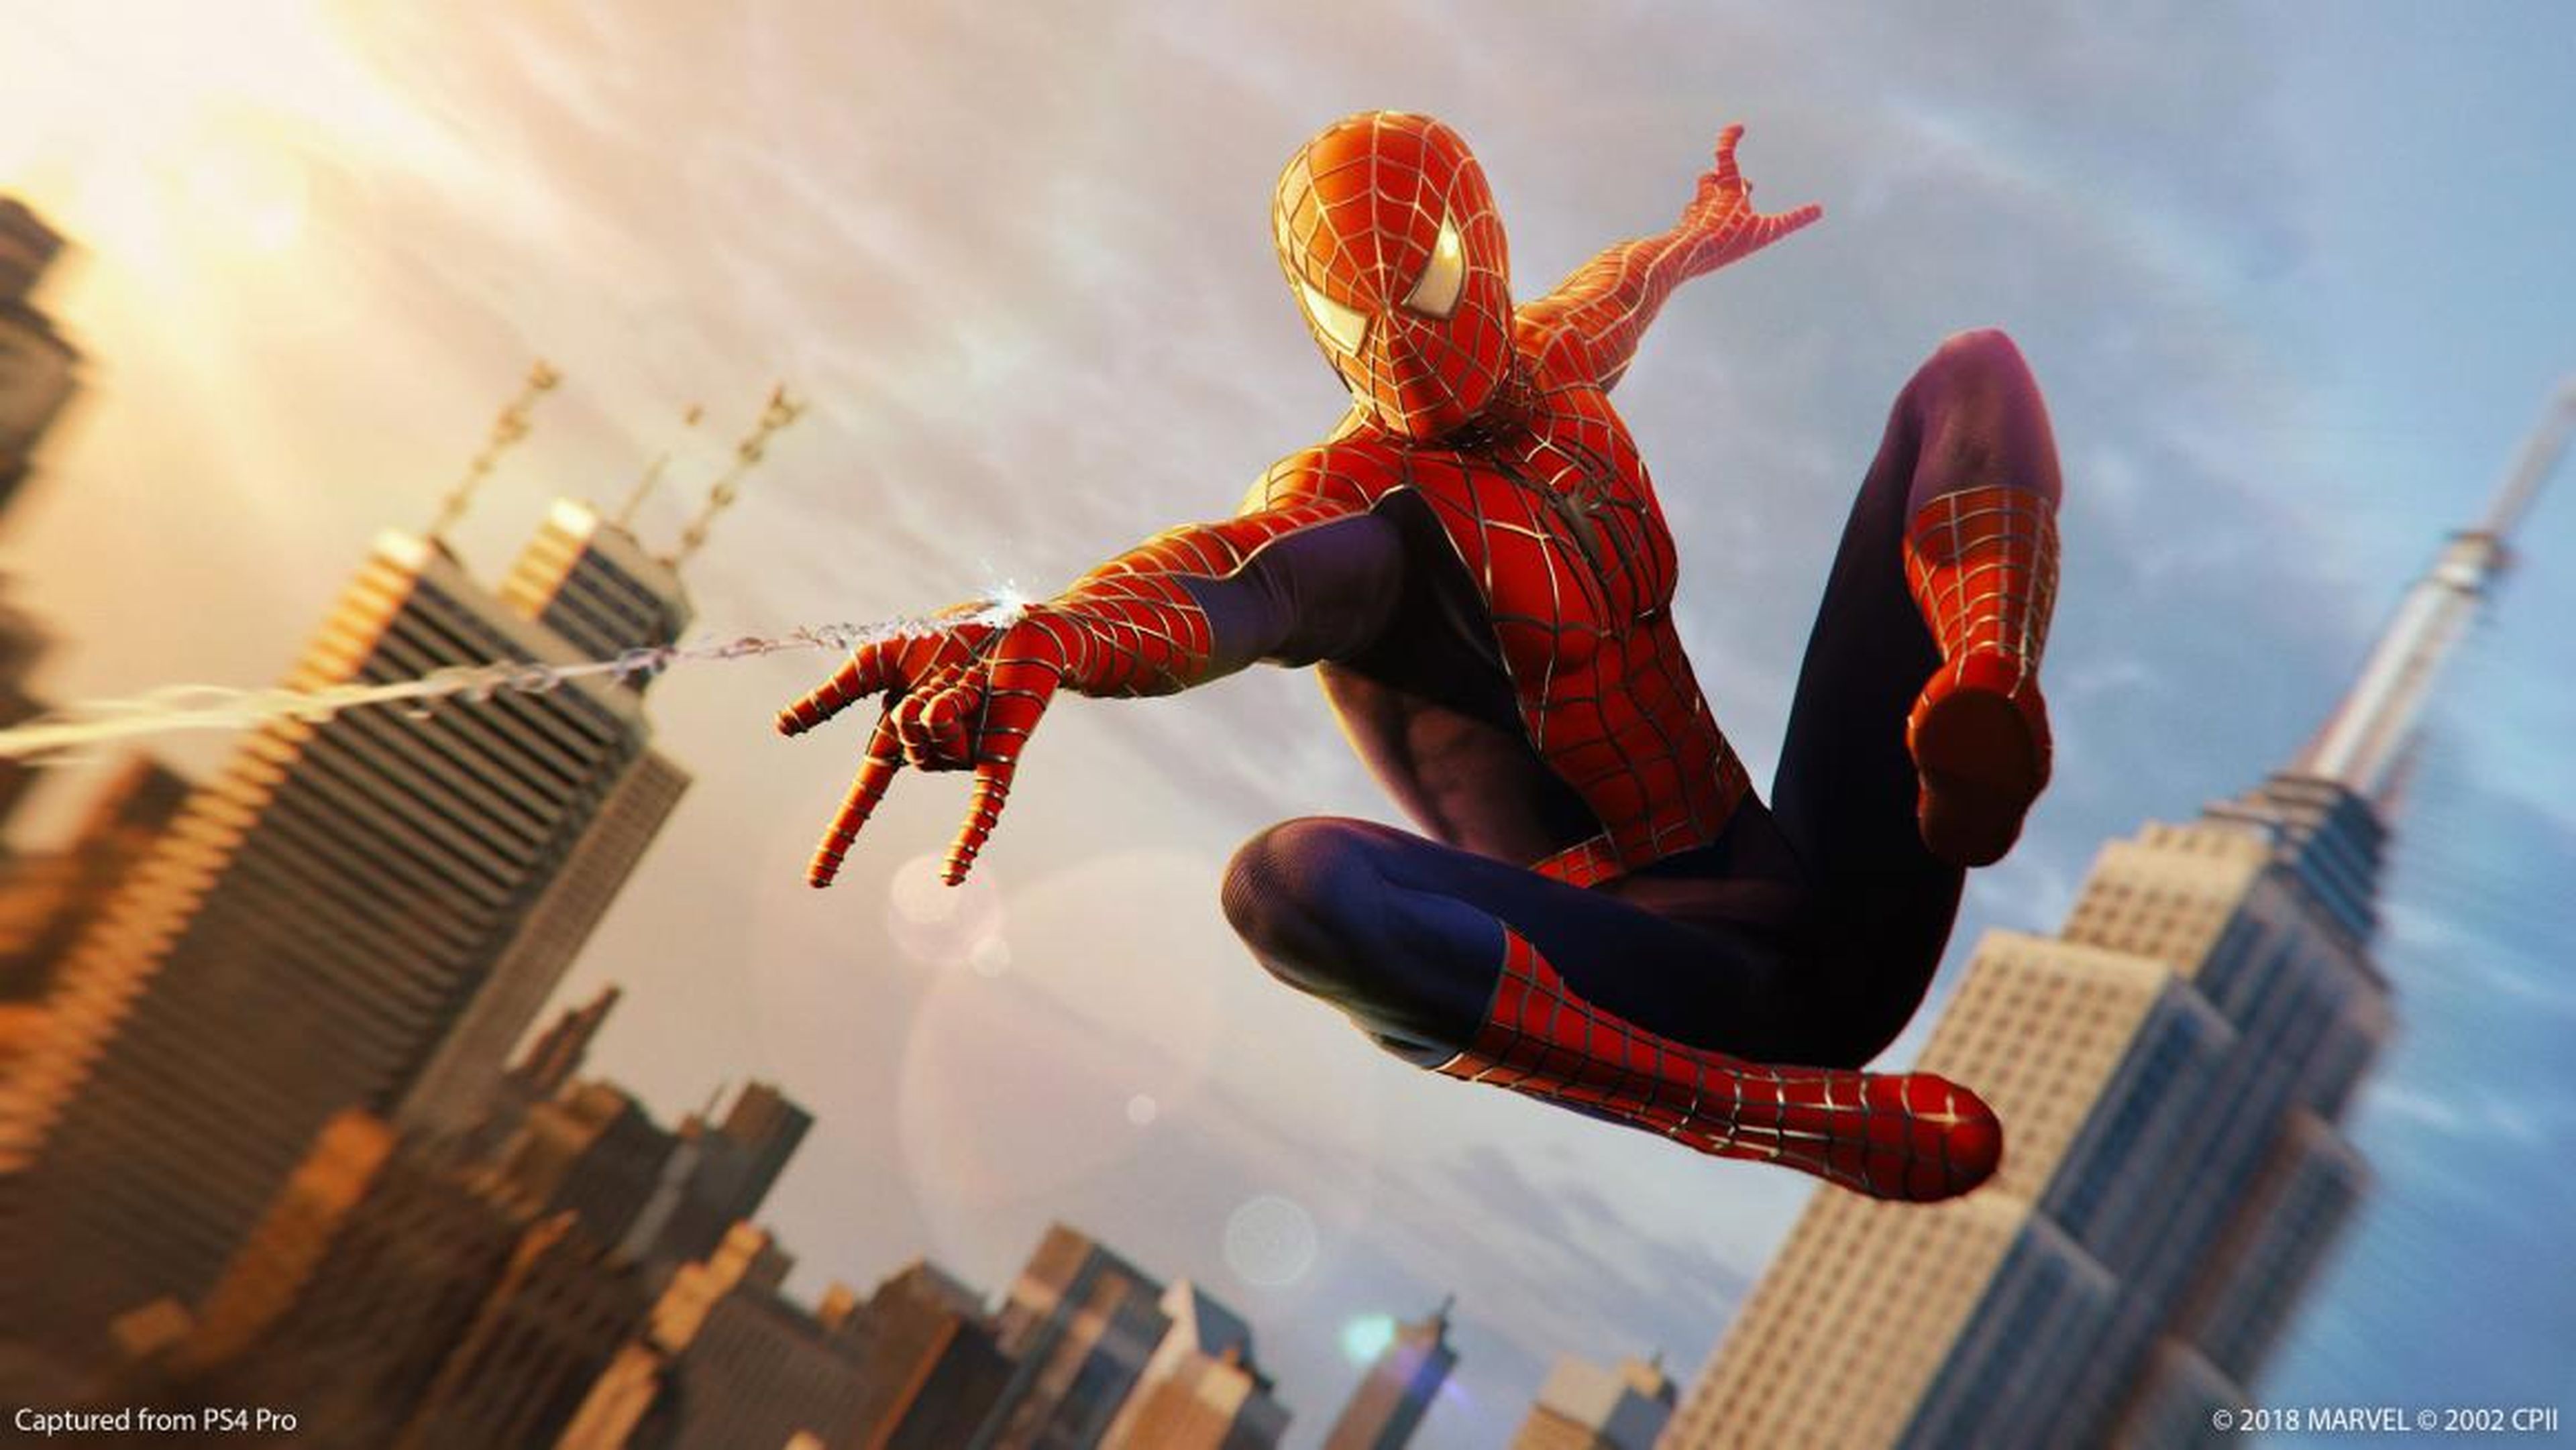 "Marvel's Spider-Man" was demonstrated running on the next-generation PlayStation console.